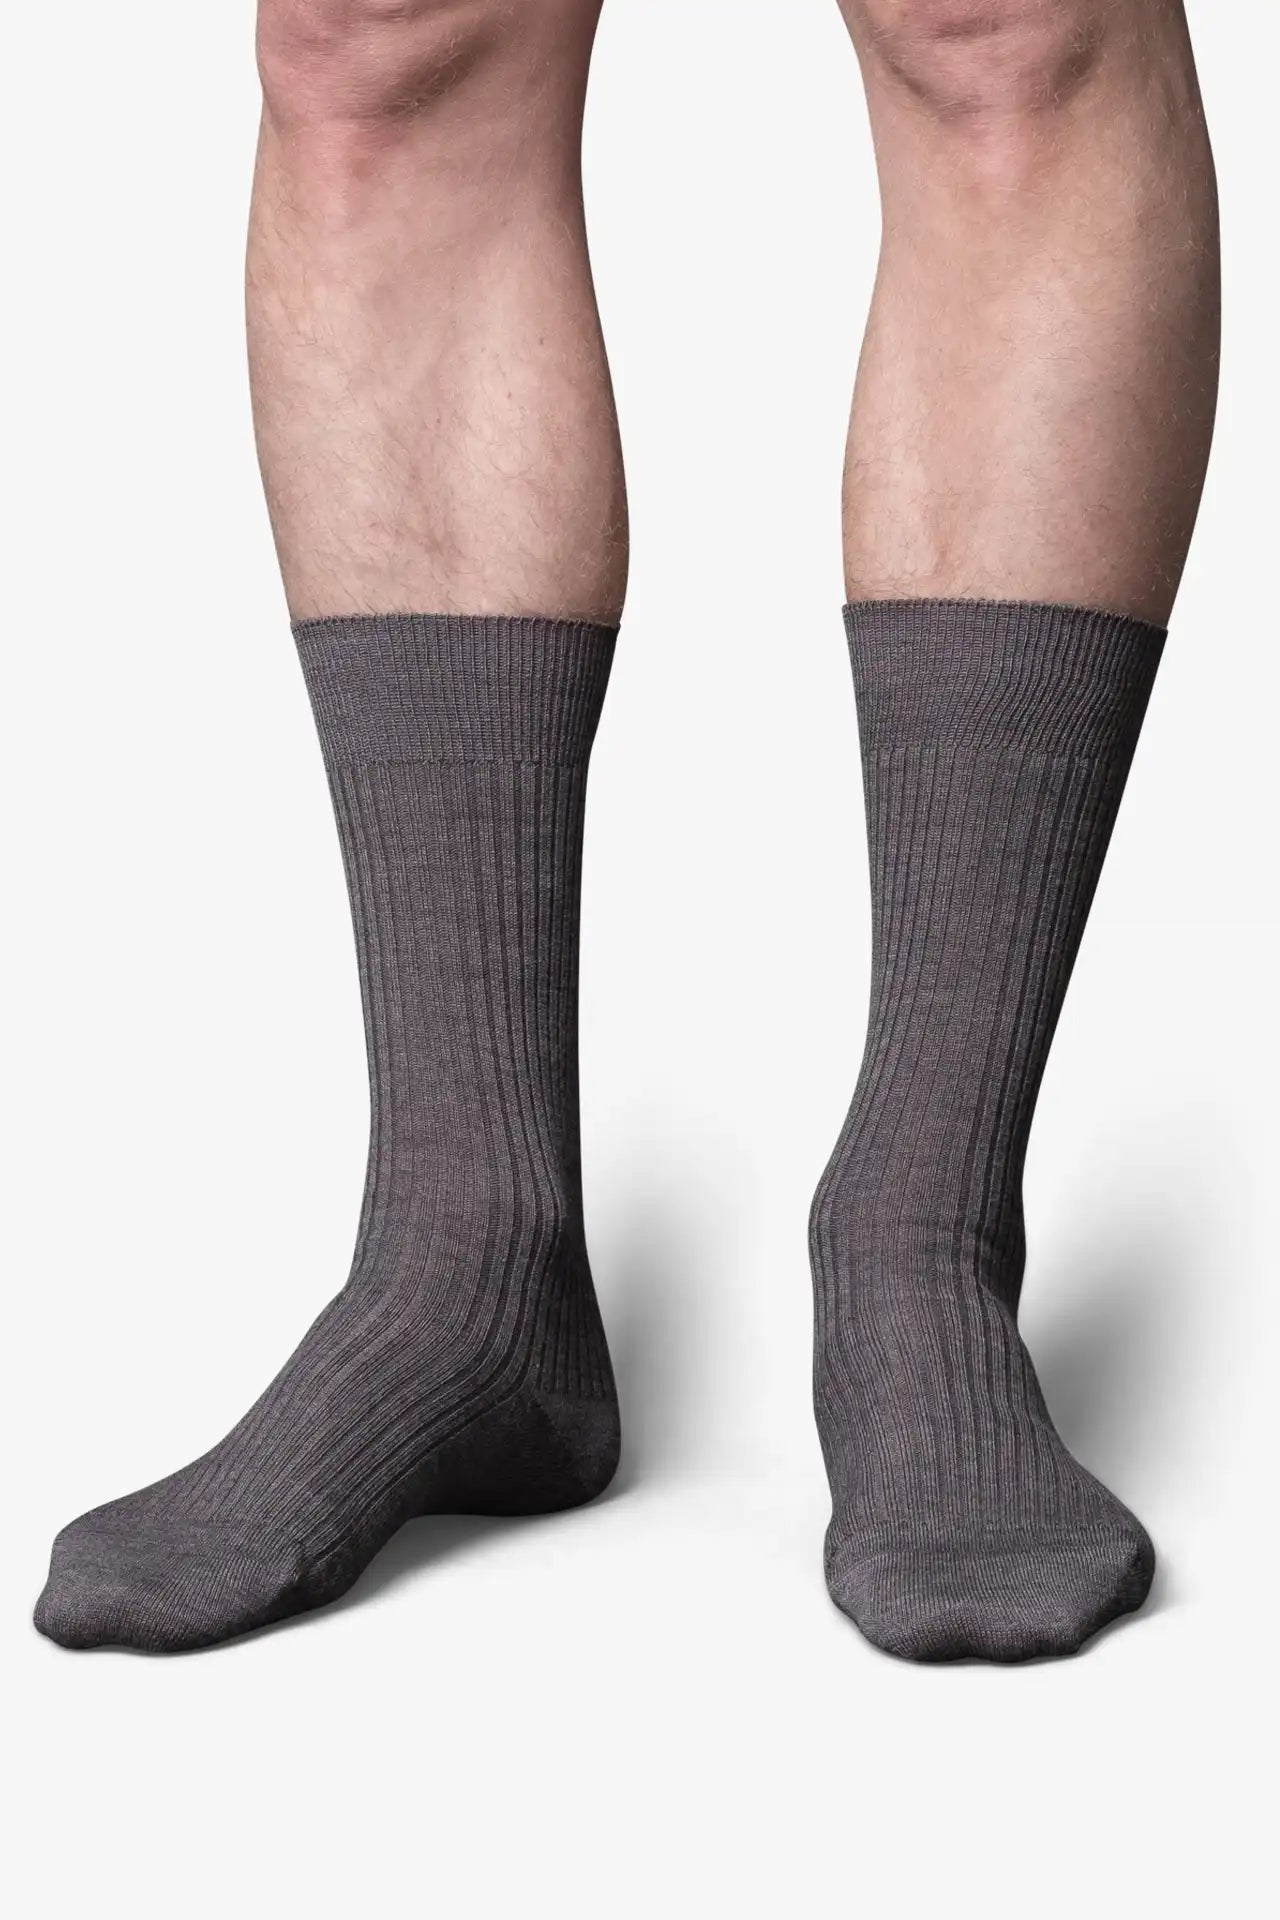 Gray dress socks in merino wool. Swedish design by once a day and produced by glenn clyde. Can we washed in warm water without shrinking.